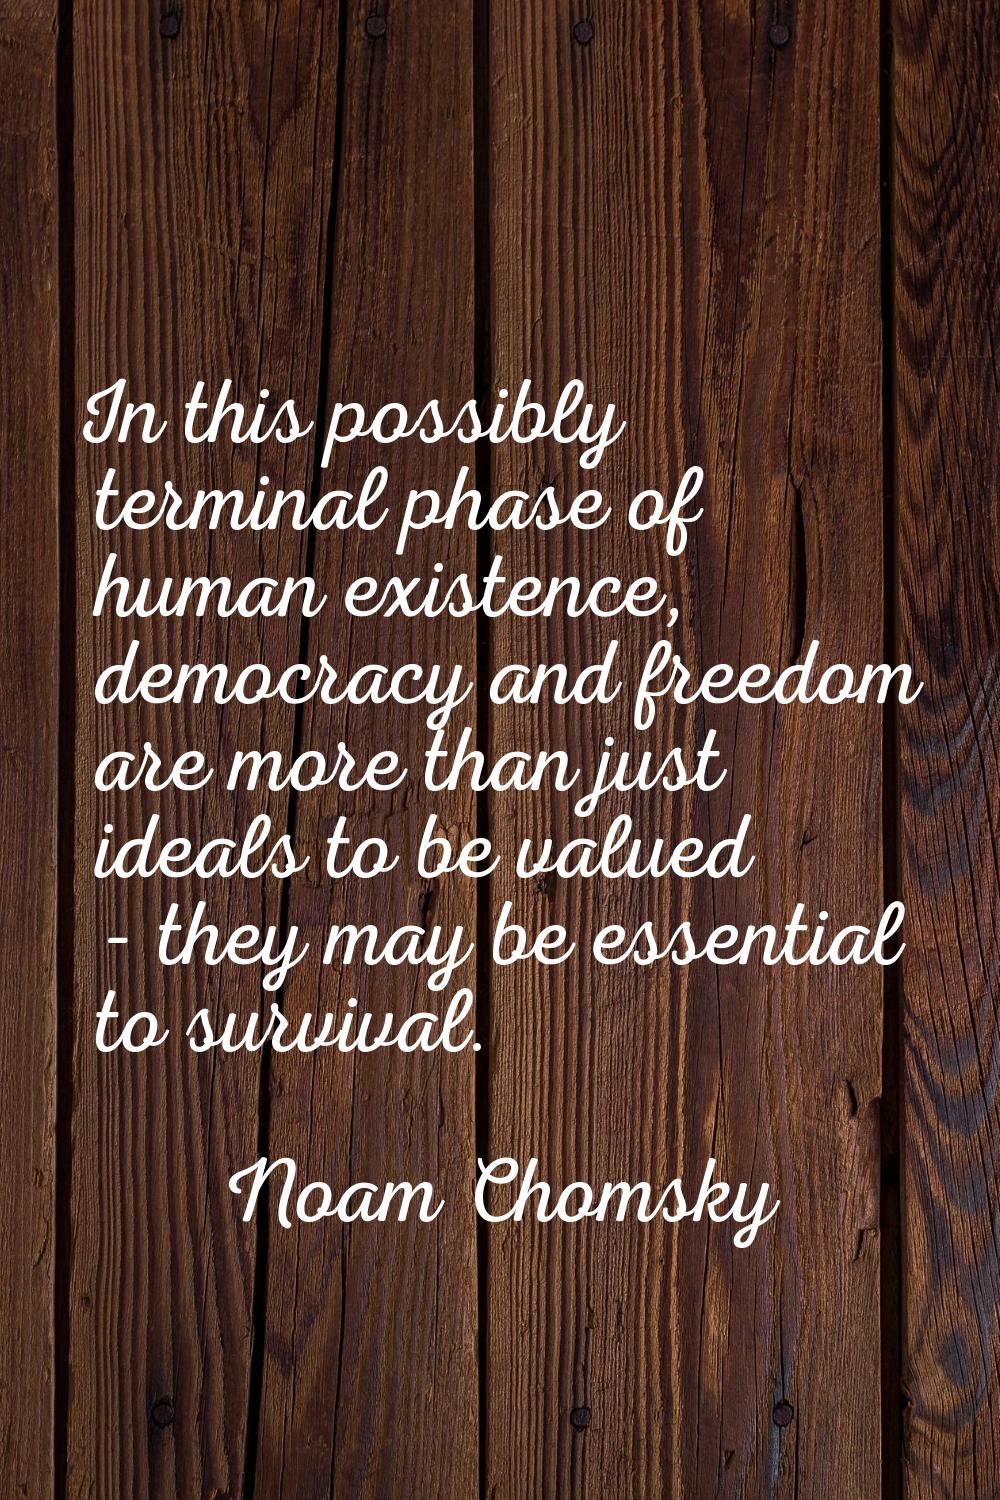 In this possibly terminal phase of human existence, democracy and freedom are more than just ideals